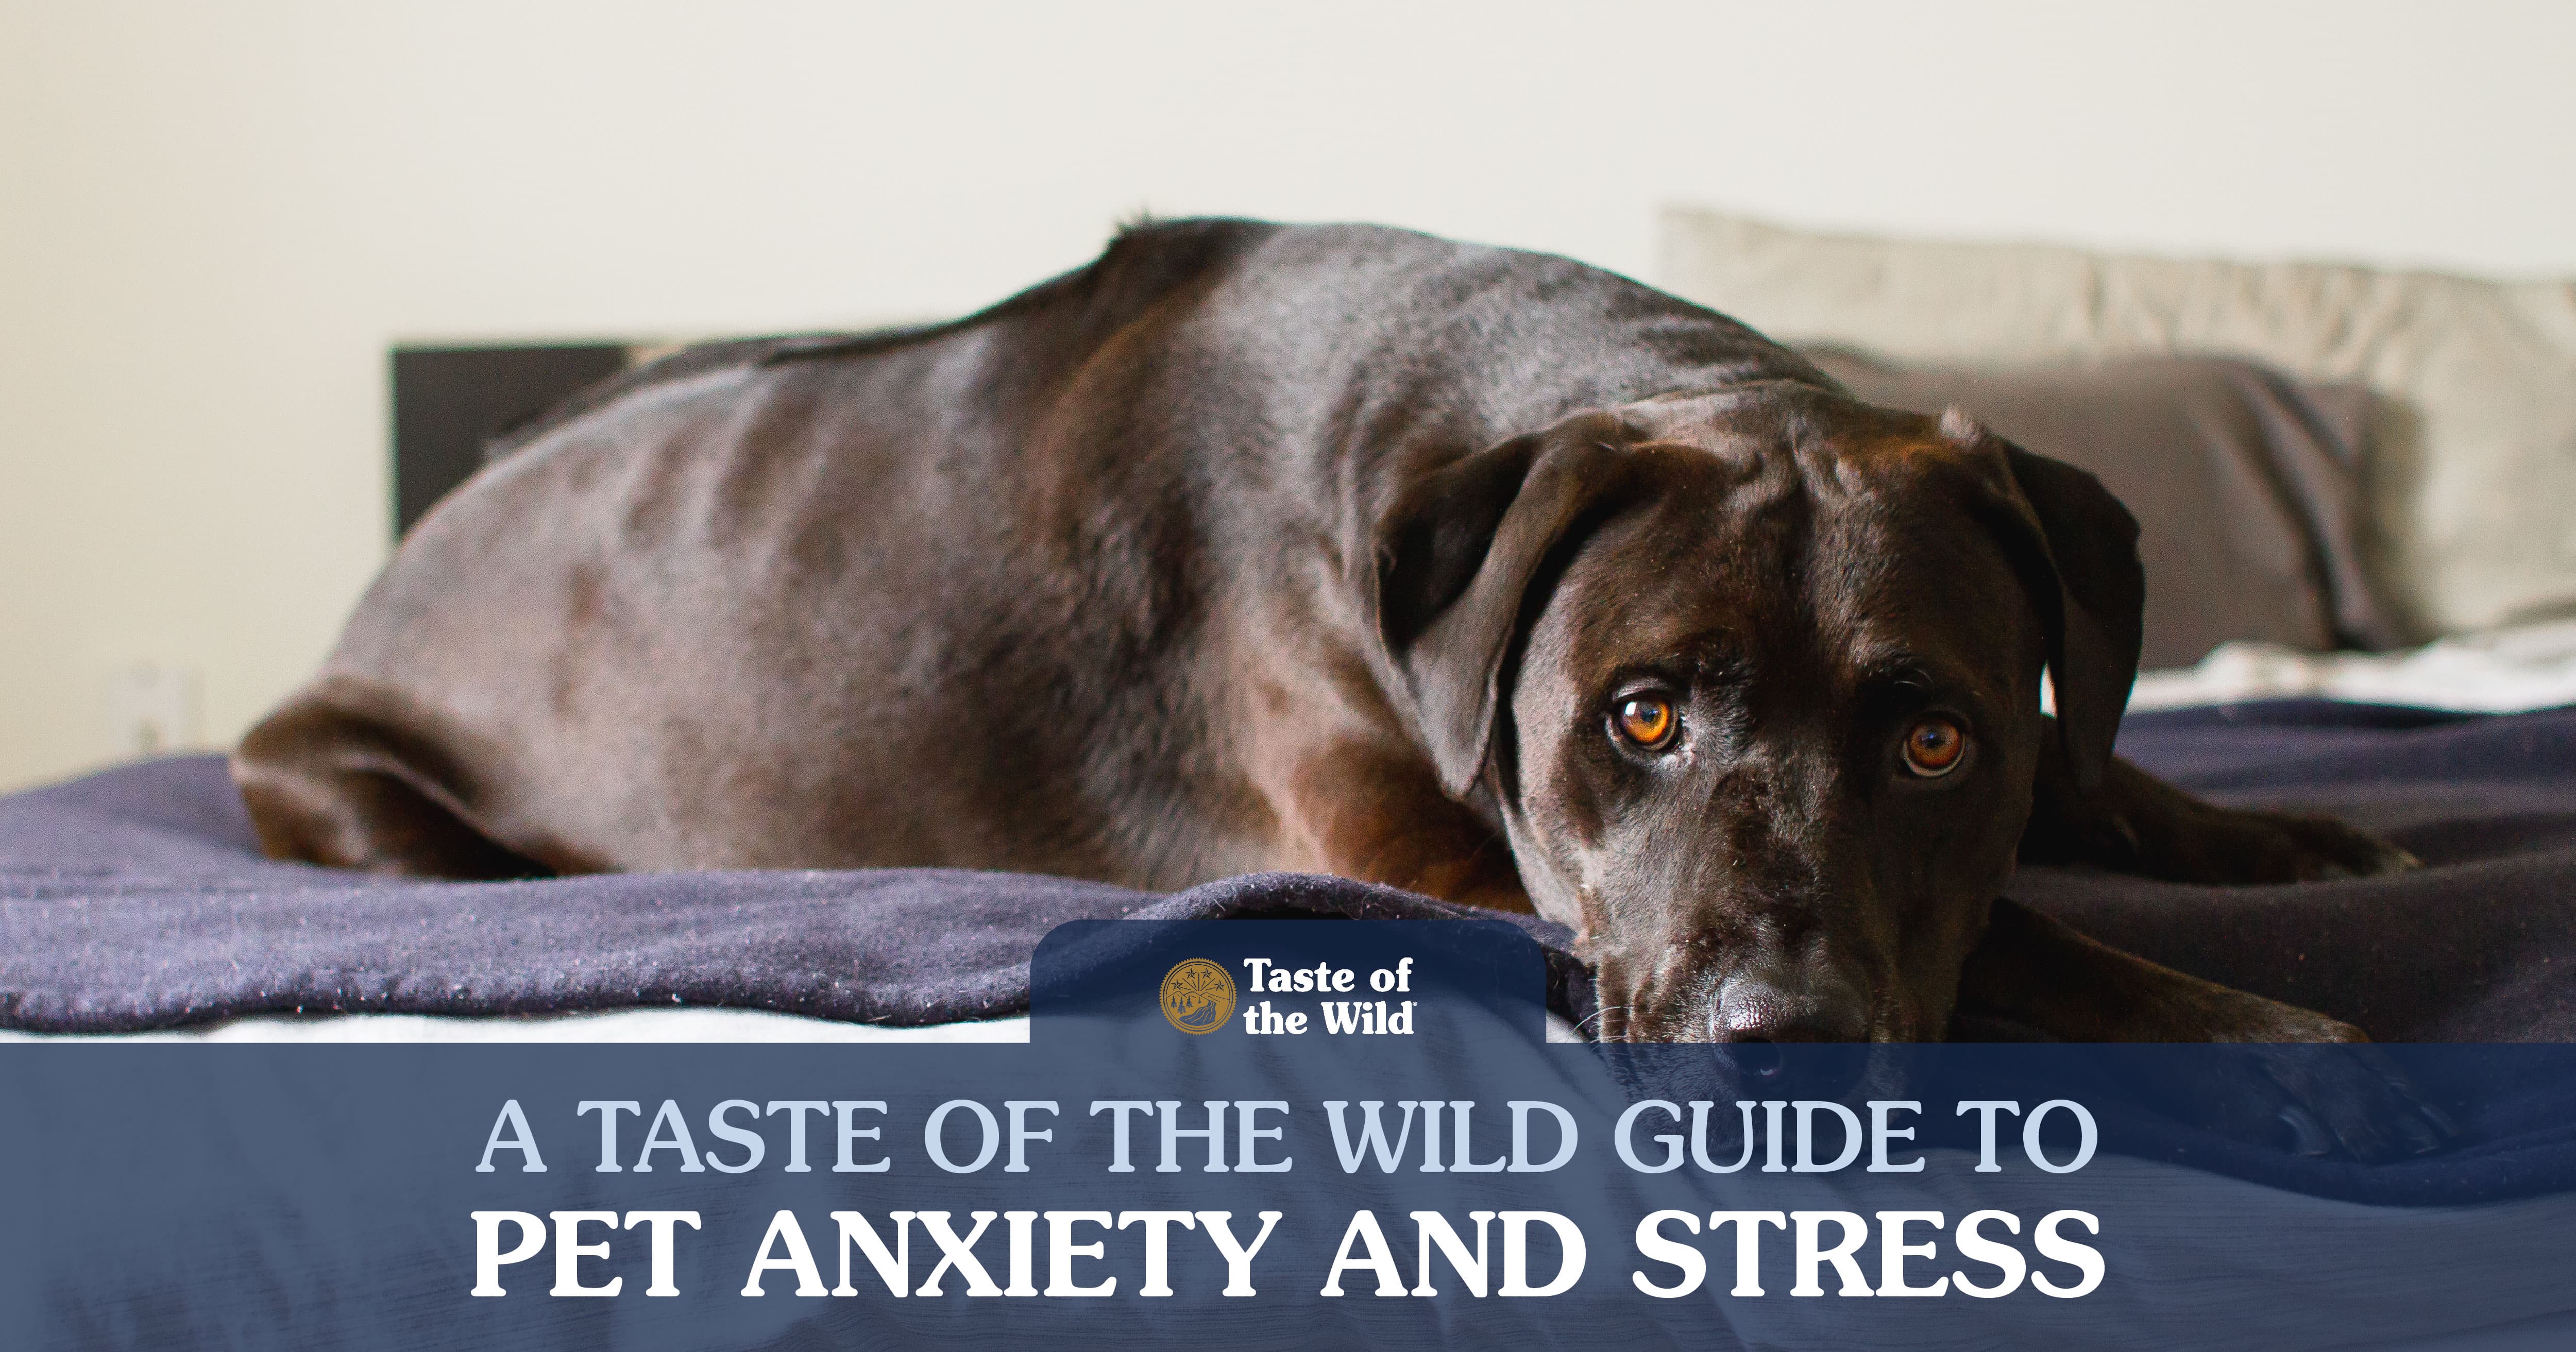 A Brown Dog Laying on a Bed. | Taste of the Wild